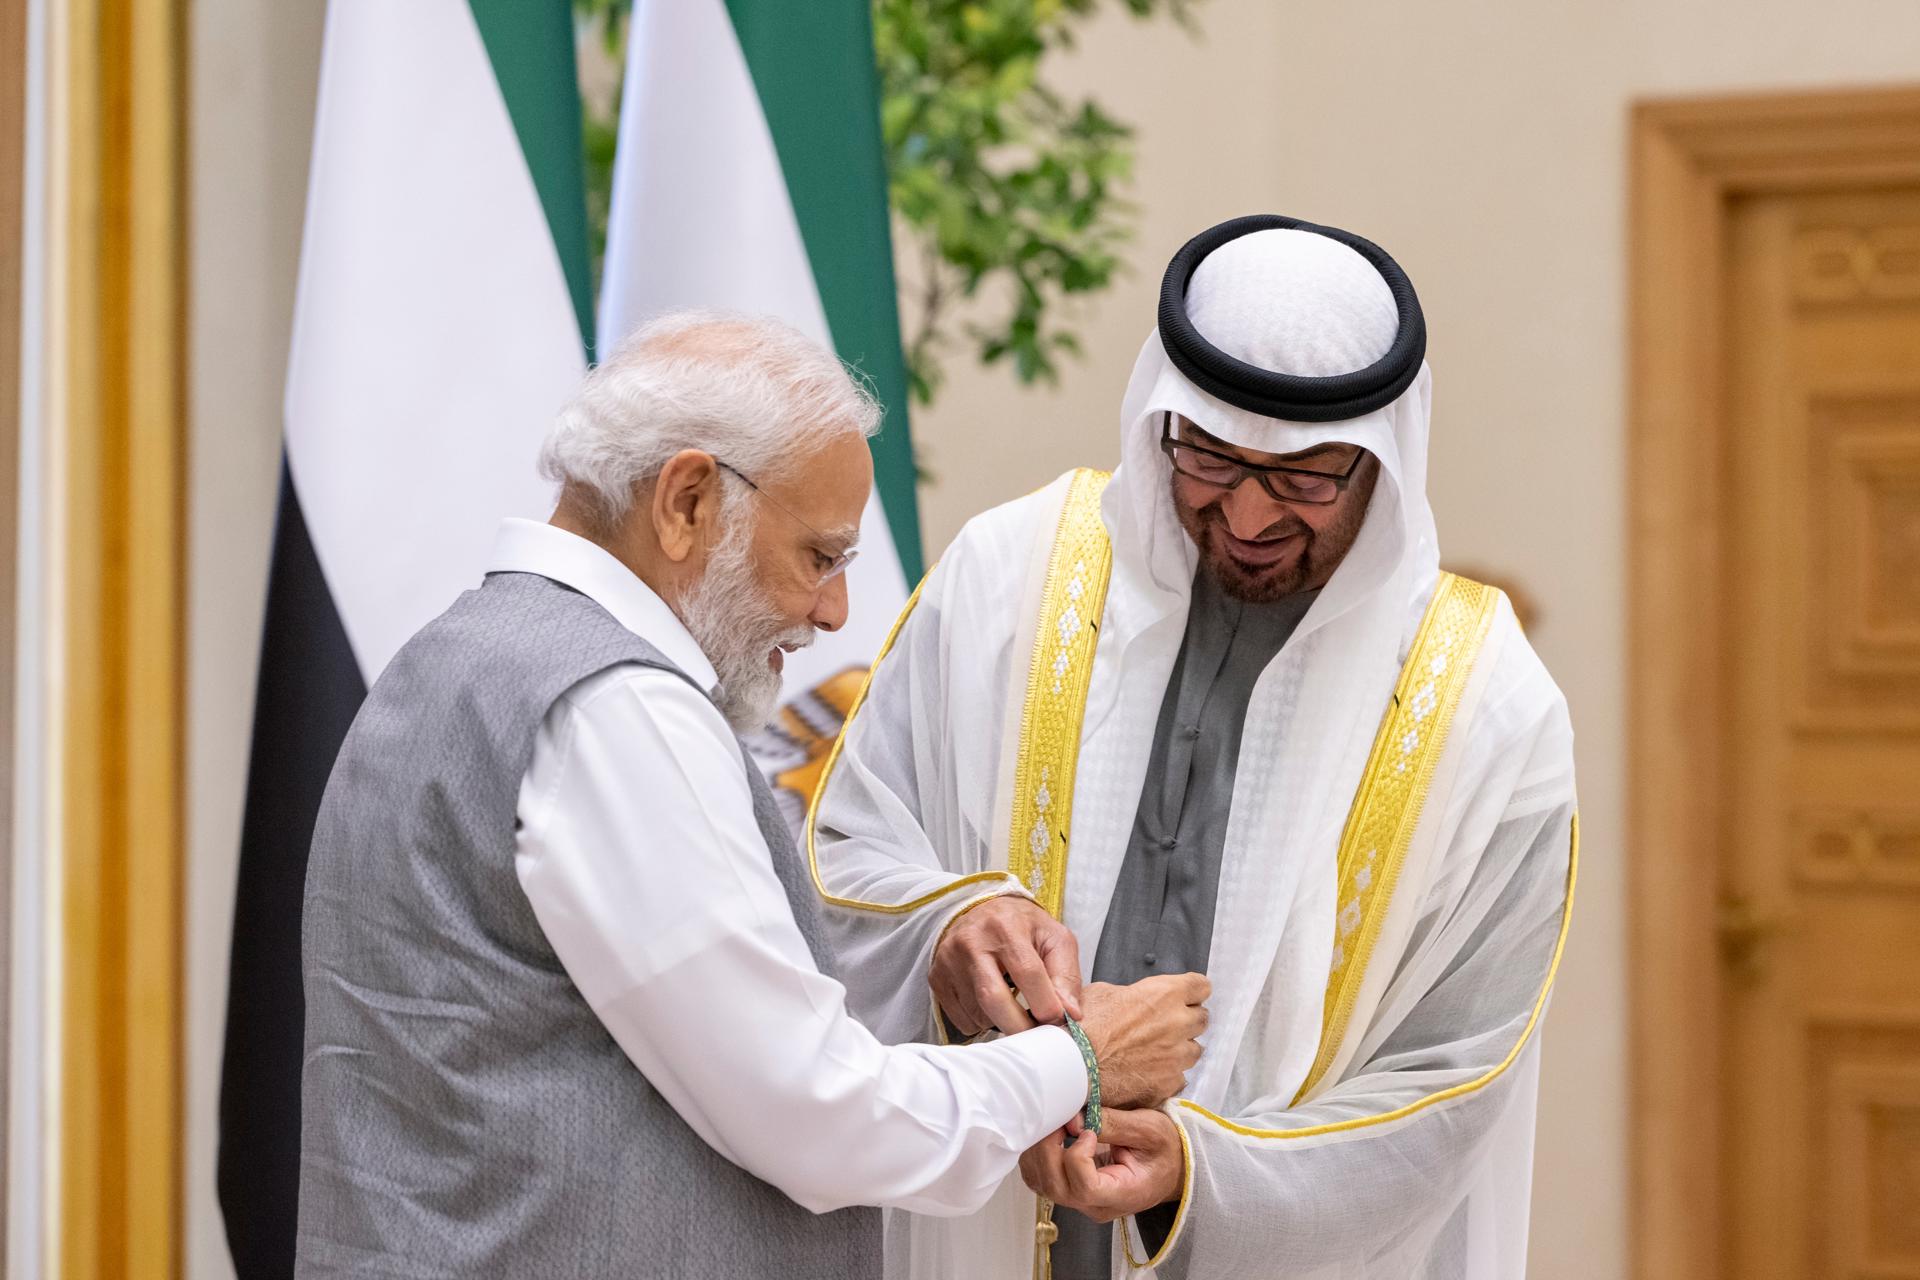 A handout photo made available by the UAE's Presidential Court shows President of the United Arab Emirates and Ruler of the emirate of Abu Dhabi Sheikh Mohamed bin Zayed Al Nahyan (R) meeting with Indian Prime Minister Narendra Modi (L), in Abu Dhabi, United Arab Emirates, 15 July 2023. EFE-EPA/UAE PRESIDENTIAL COURT HANDOUT "??? ?????? ??????? ??????? ?? ????? ??????? ????? ????? ??? ?? ??? ???????? ????????? ? / ?? ????????? ?????? ??????? ?????? ?? ?????? ??????. ??? ???? ??????? ??????? ???? ??? ???? ??? ???? ????????? ?? ???? ?????? ?? ?????? ?? ??????? ?? ????? ???? ???????? ?? ?????? ?? ???? ??????? ????? ?? ???? ??????? ?? ??????? ???? ????? ????? ???? ?? ???? ?? ????? ???? ???? ???????? ??????? ???????? ?? ????? ?????? ?? ????? ???????? ??????? ??????? ?? ?? ??? ???? ?????? ?? ??????". 
"This official UAE Presidential Court photograph is being made available only for publication by news organizations and/or for pe HANDOUT EDITORIAL USE ONLY/NO SALES